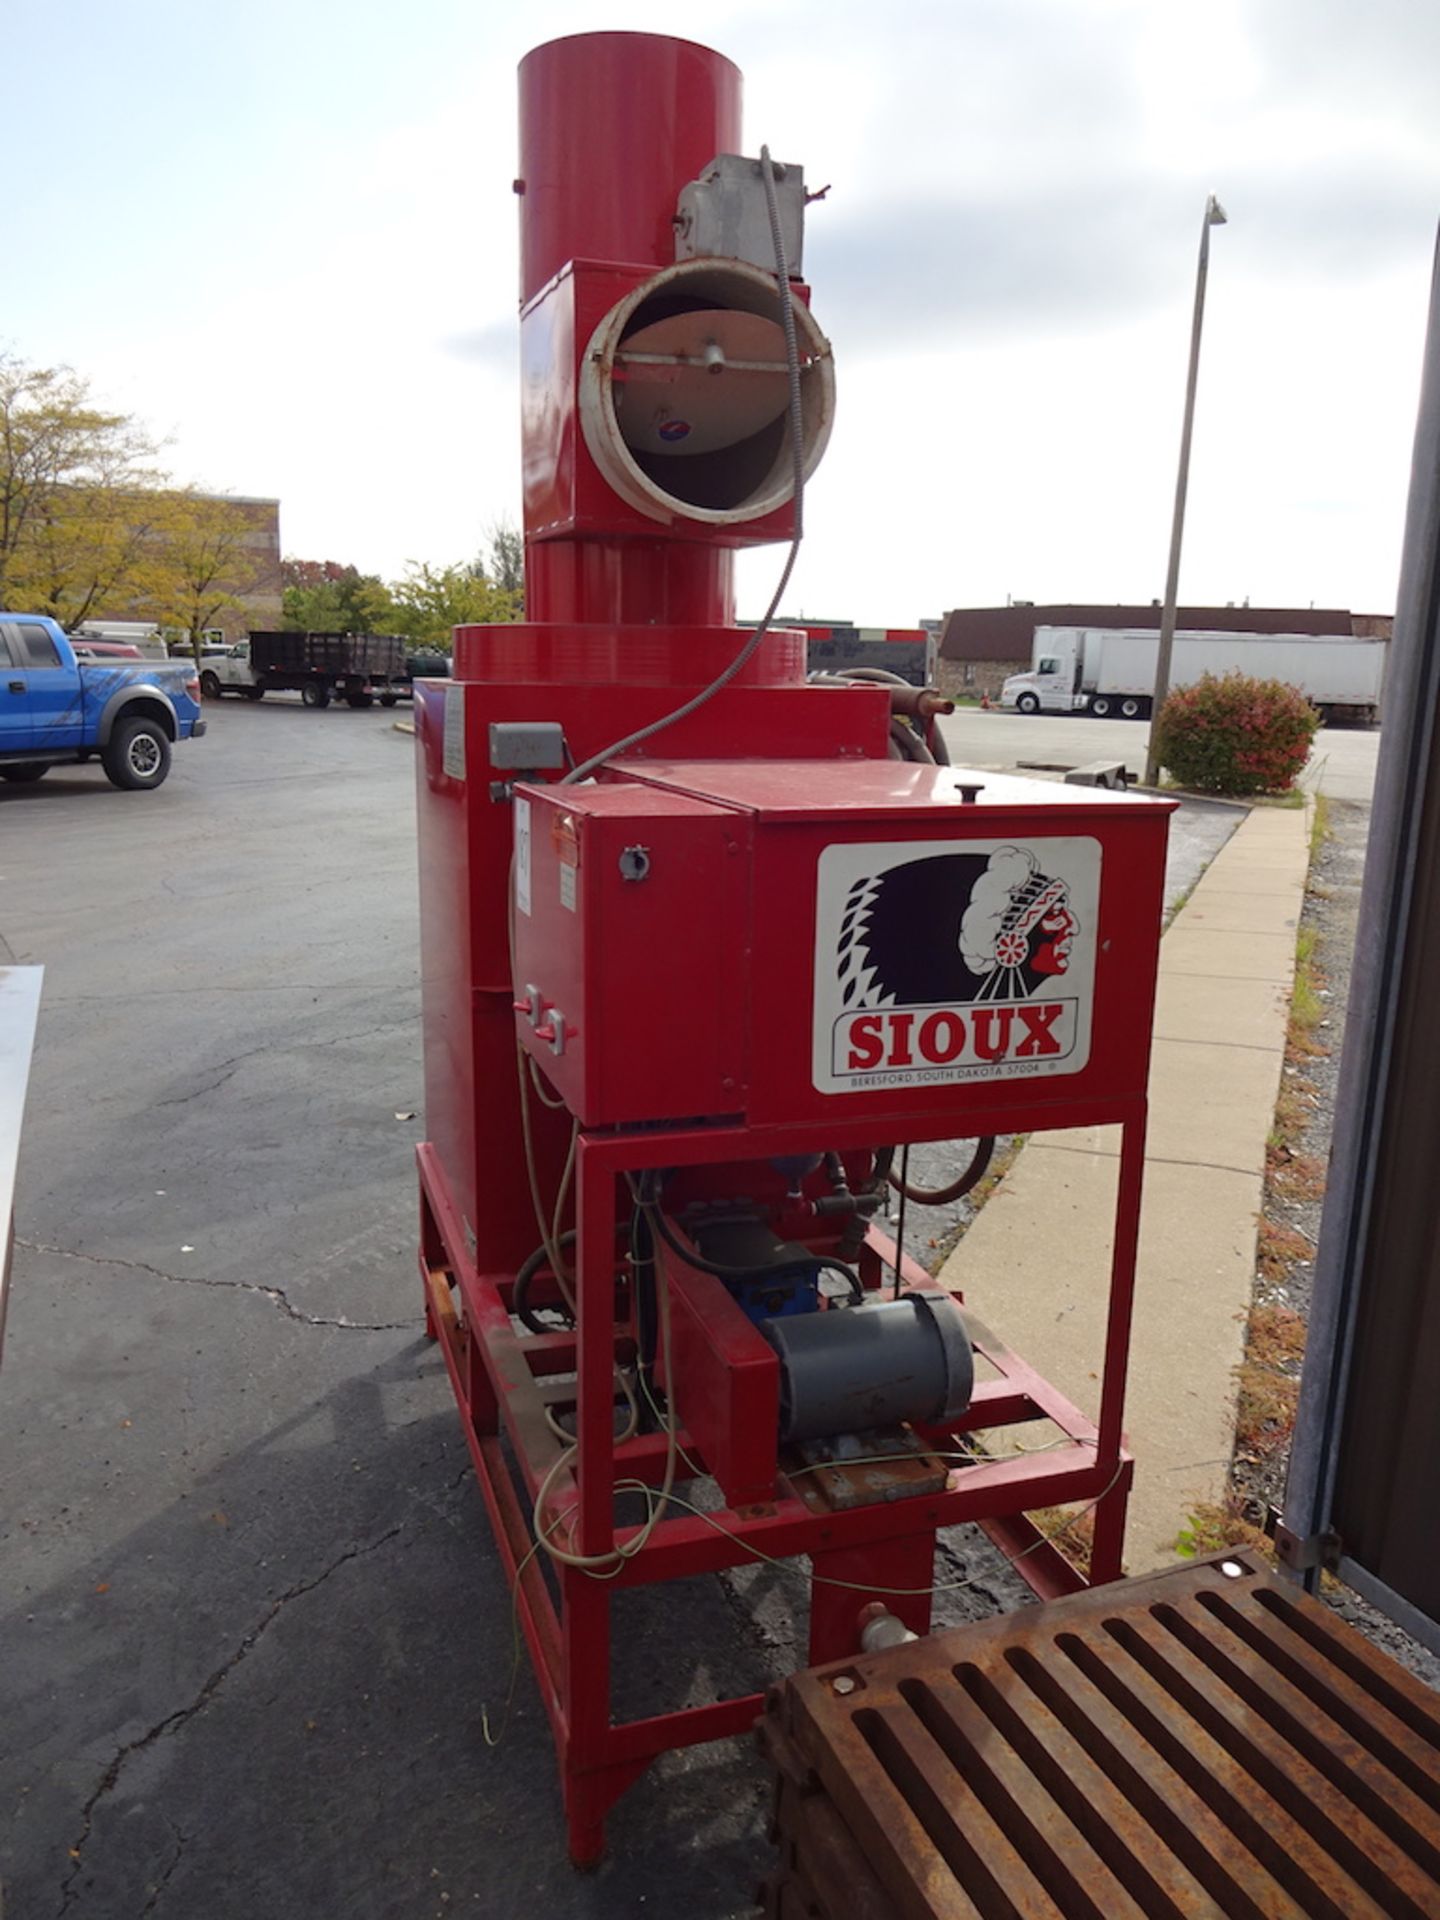 Sioux Model 400-2 Natural Gas Steam Cleaner, S/N 028911, 2 HP, 1125 MBTU - Image 4 of 4